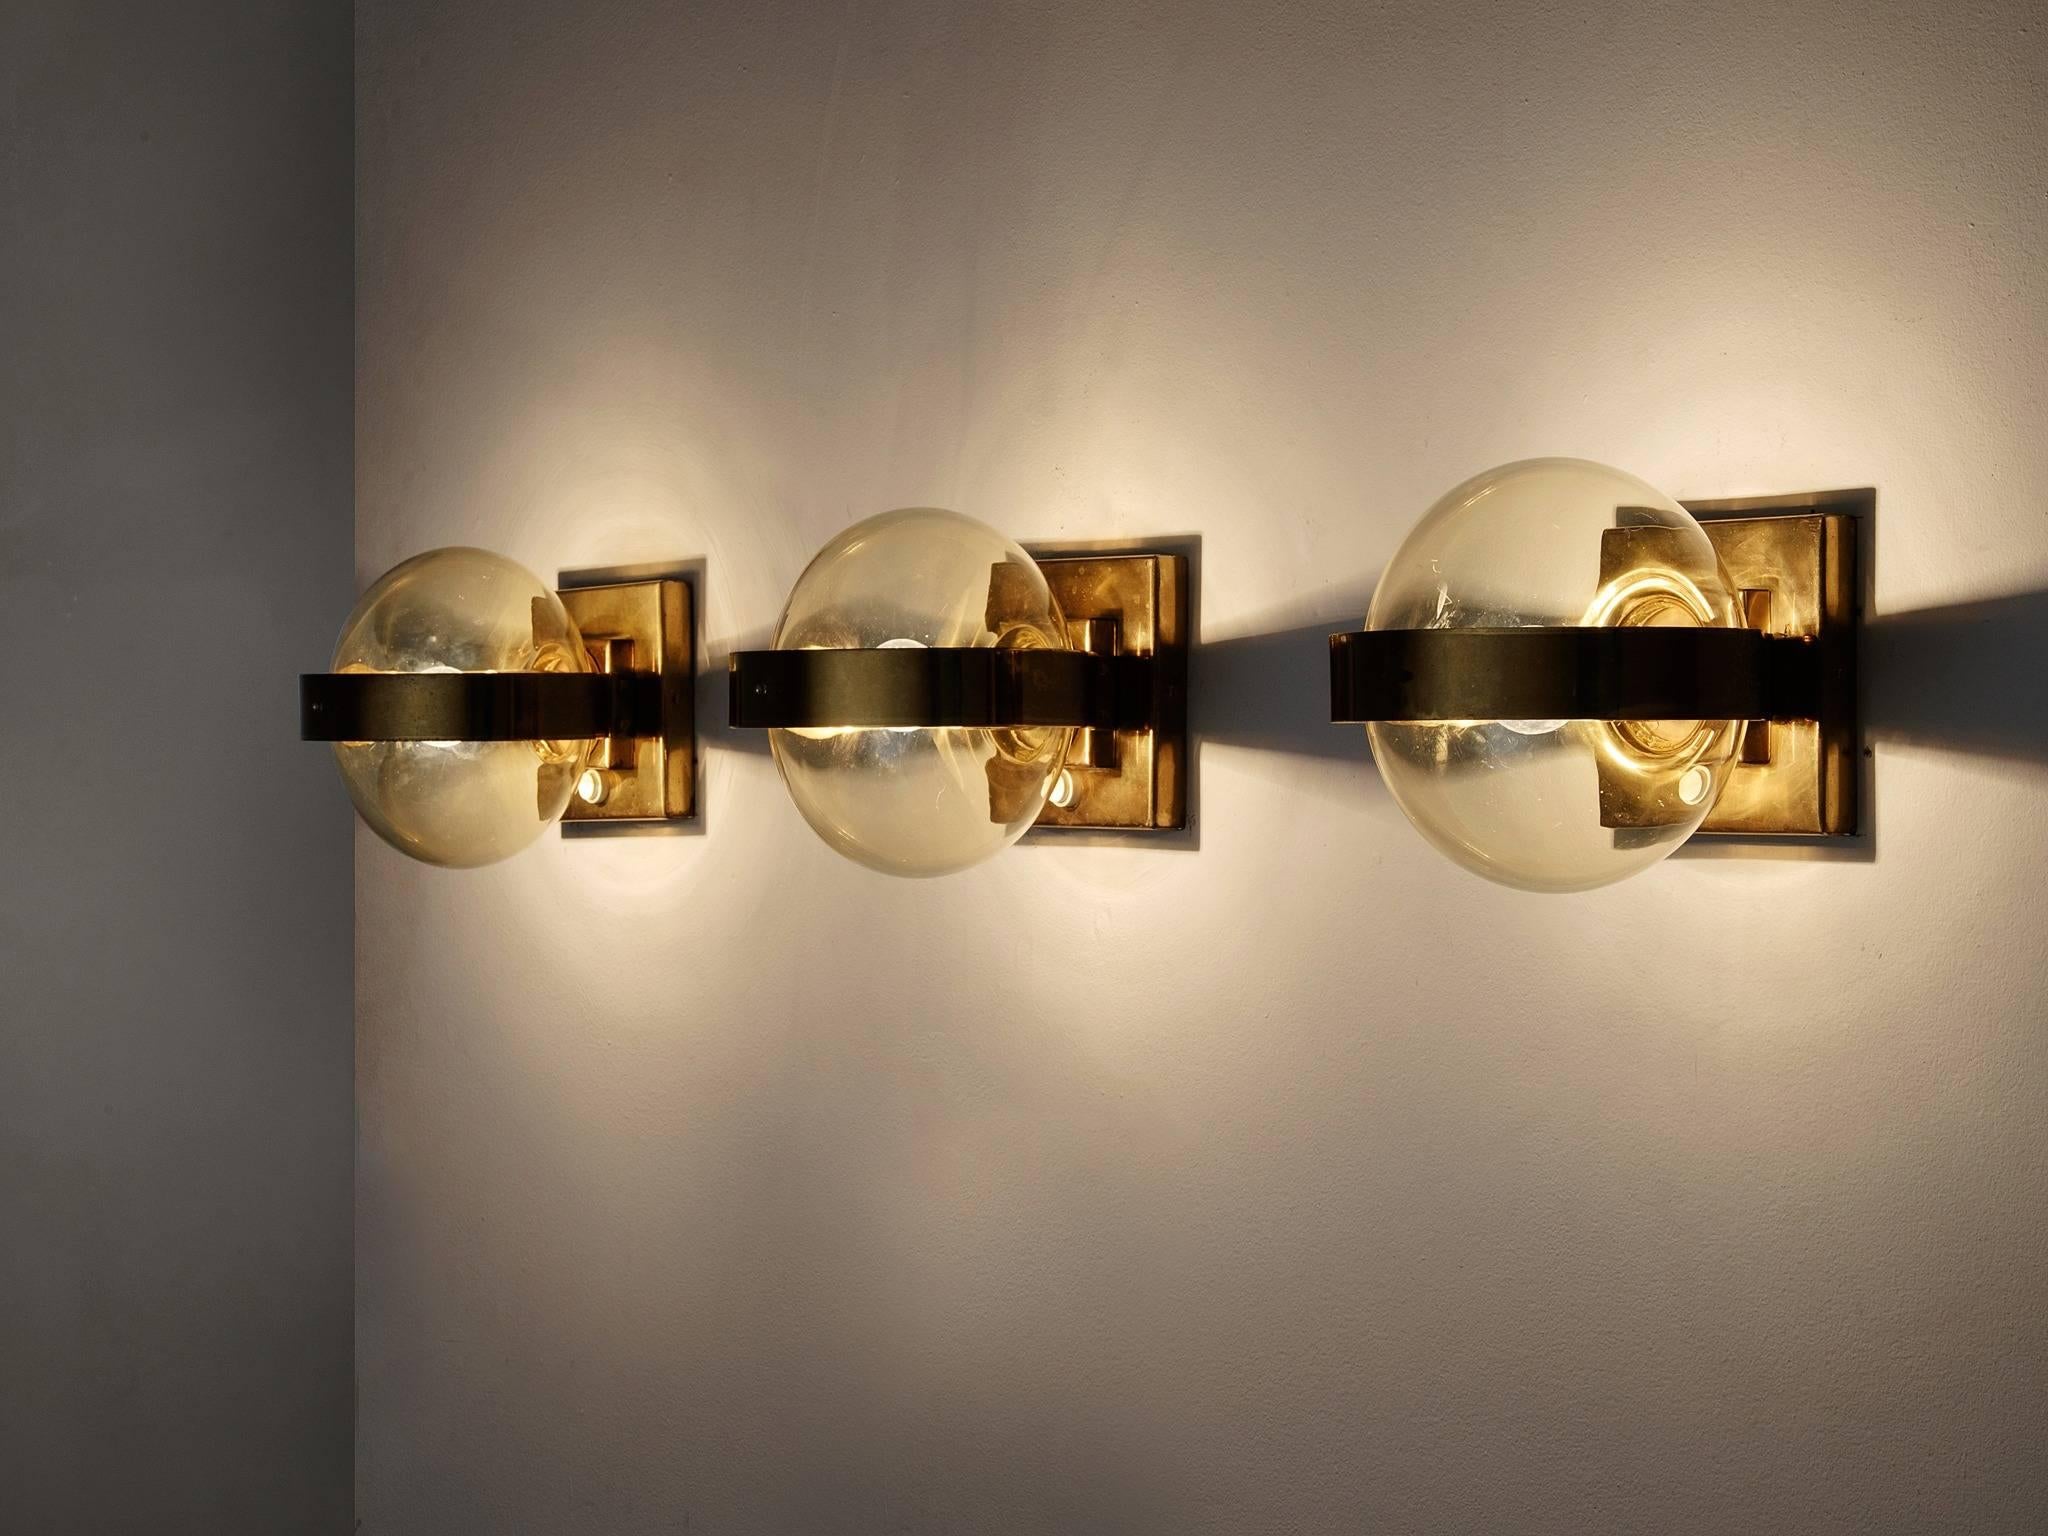 Set of two wall lights, in brass and glass, Europe 1970s.

Set of sconces with beautiful colored glass spheres. Fixture in shining brass, in addition of a brass ring around the glass shade. Each globe shaped sphere is made from clear glass and is